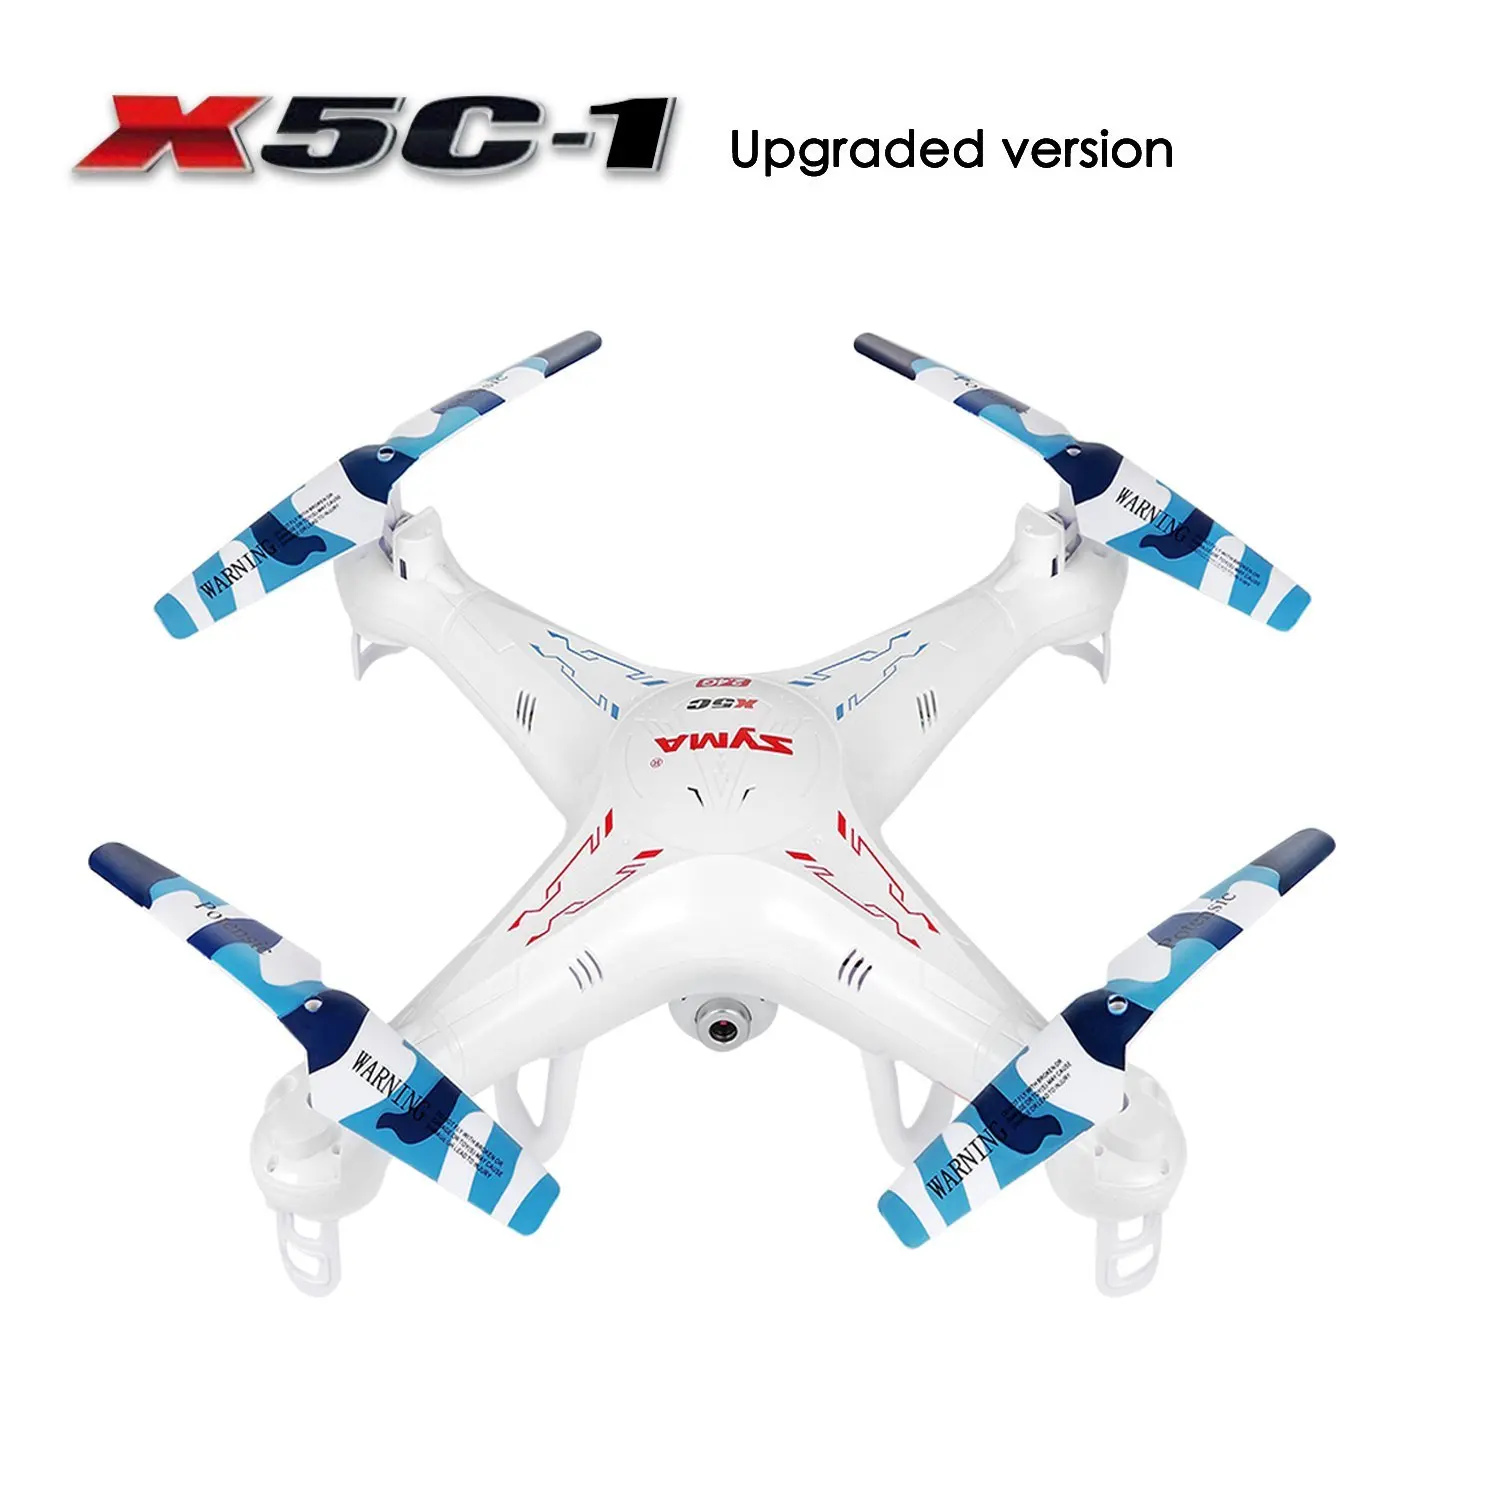 

RC Quadcopter,Upgraded X5C-1 Syma Explorer 2.4GHz 6 Axis Gyro 4CH RC Drone with 2 Megapixels Camera+ 4pcs Extra Propeller Blades